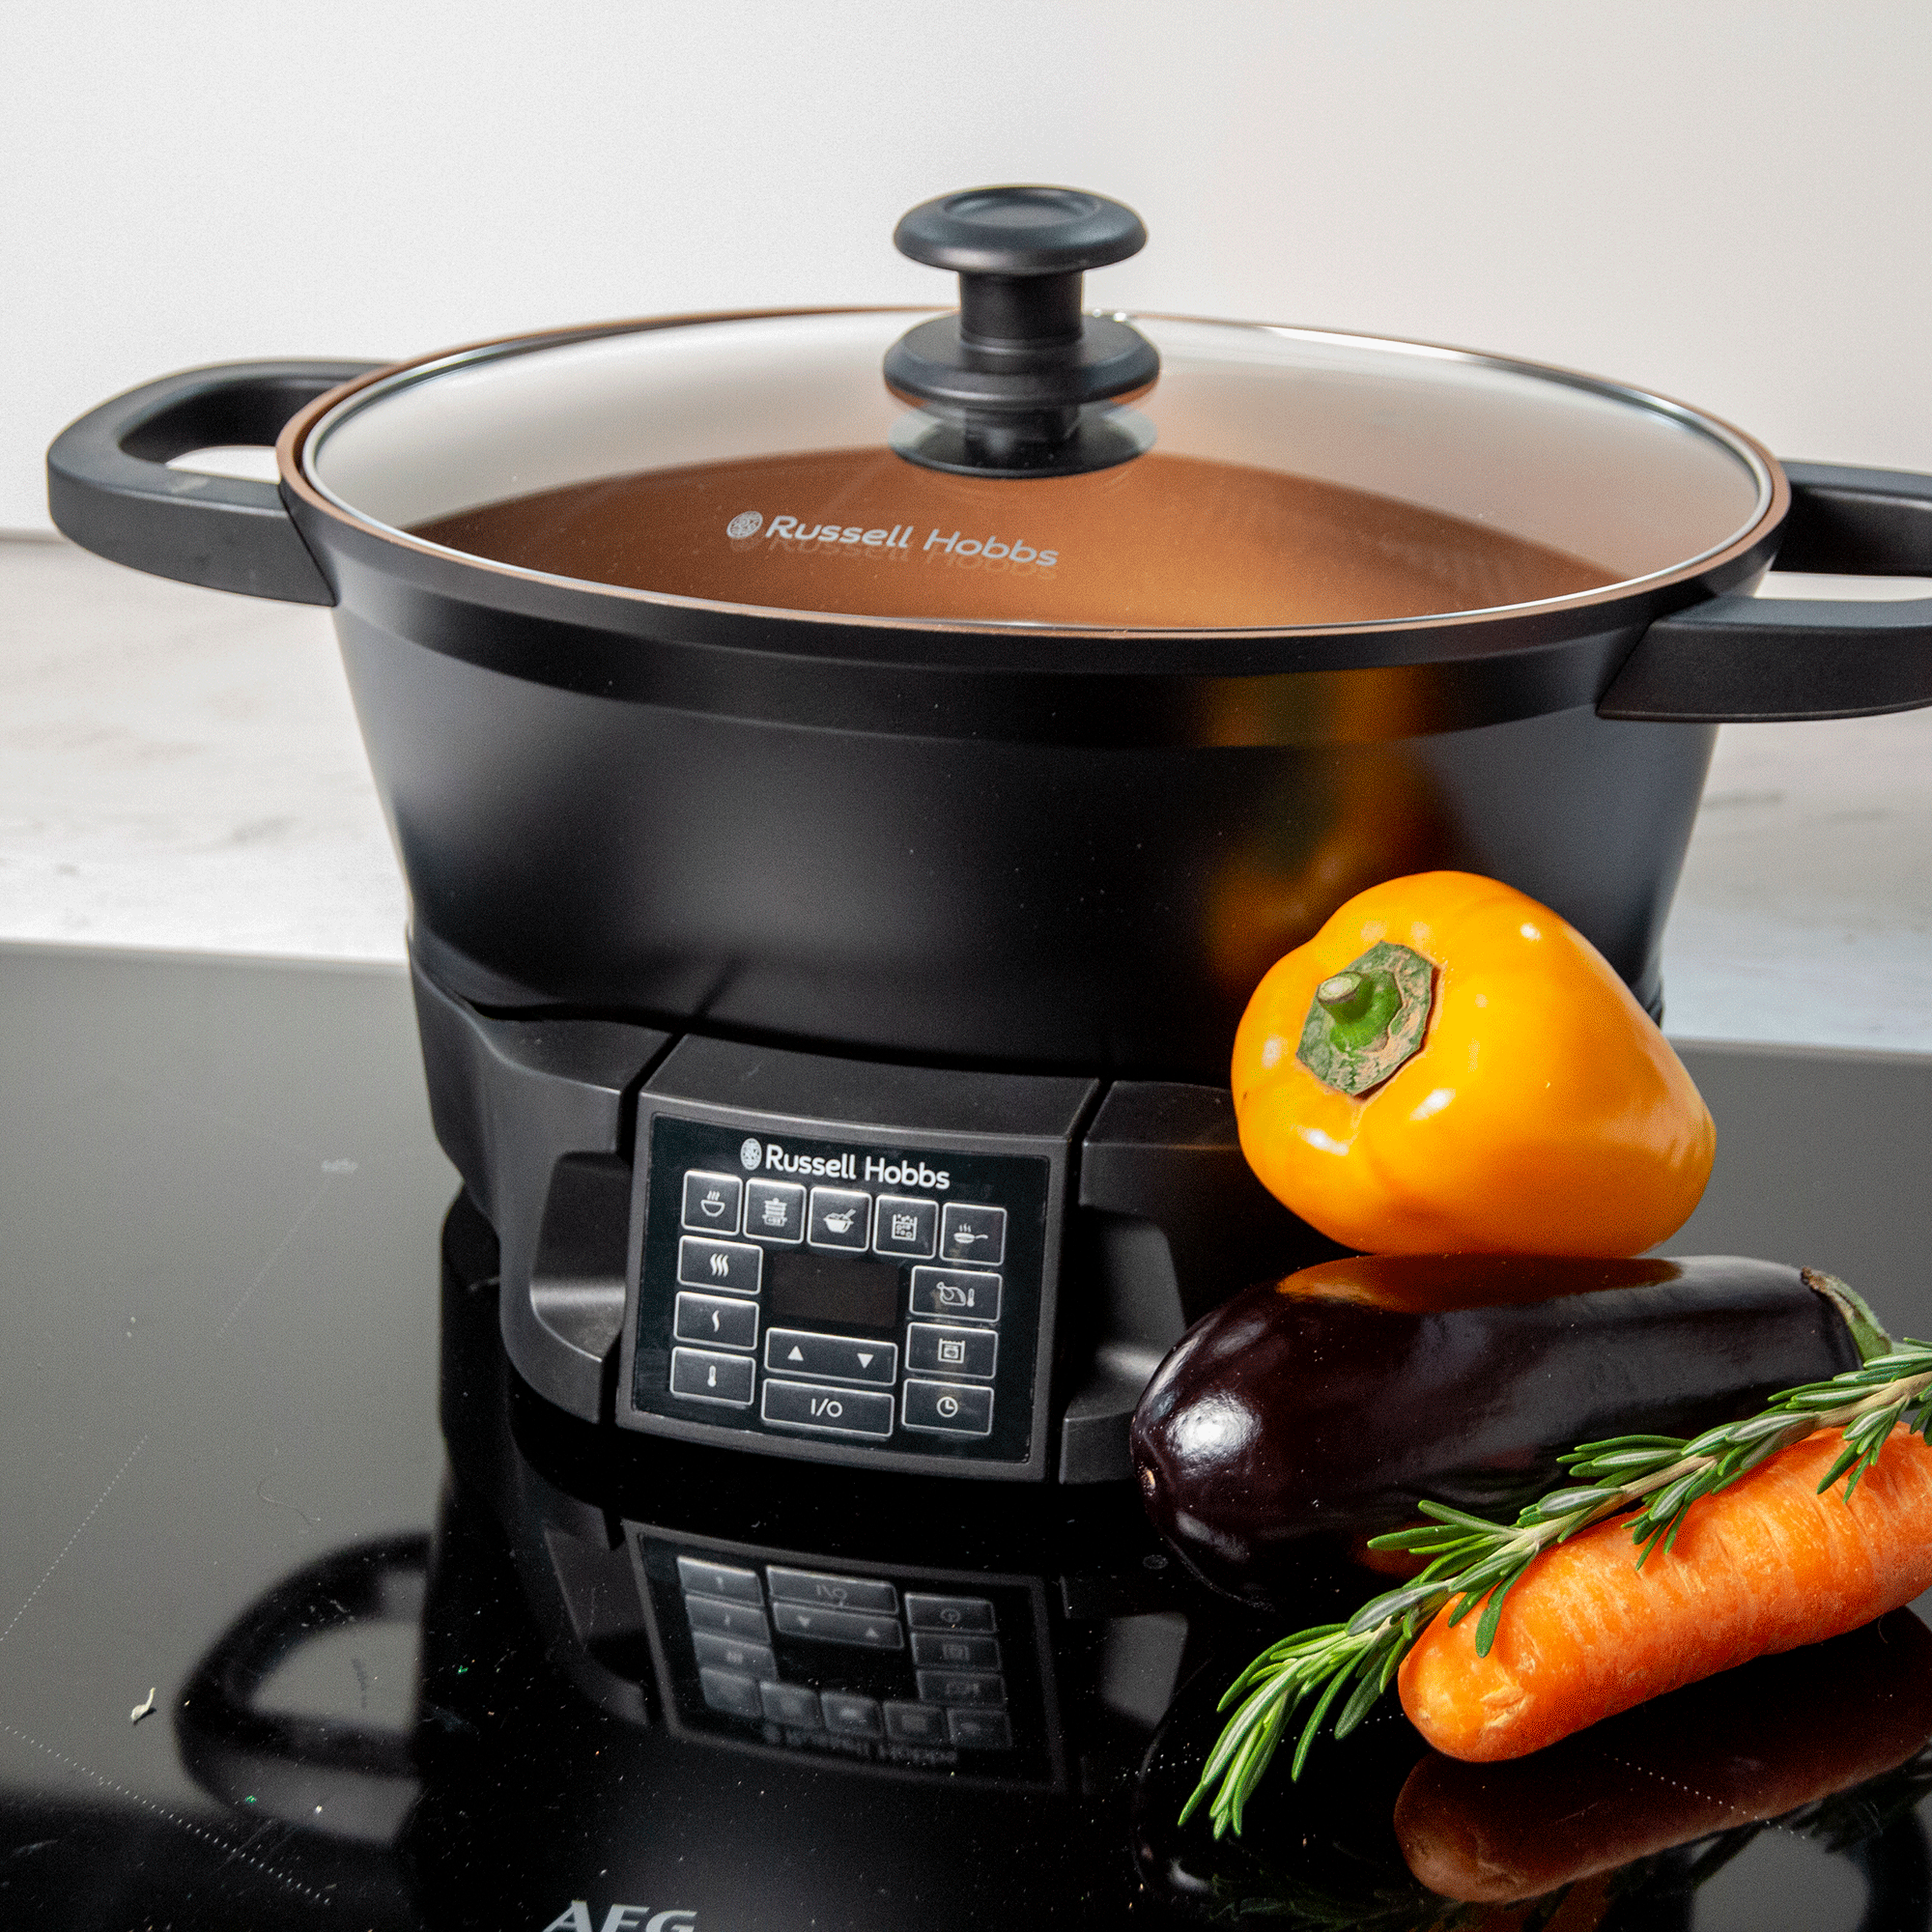 5 places in your kitchen where you should never put your slow cooker, according to appliance experts